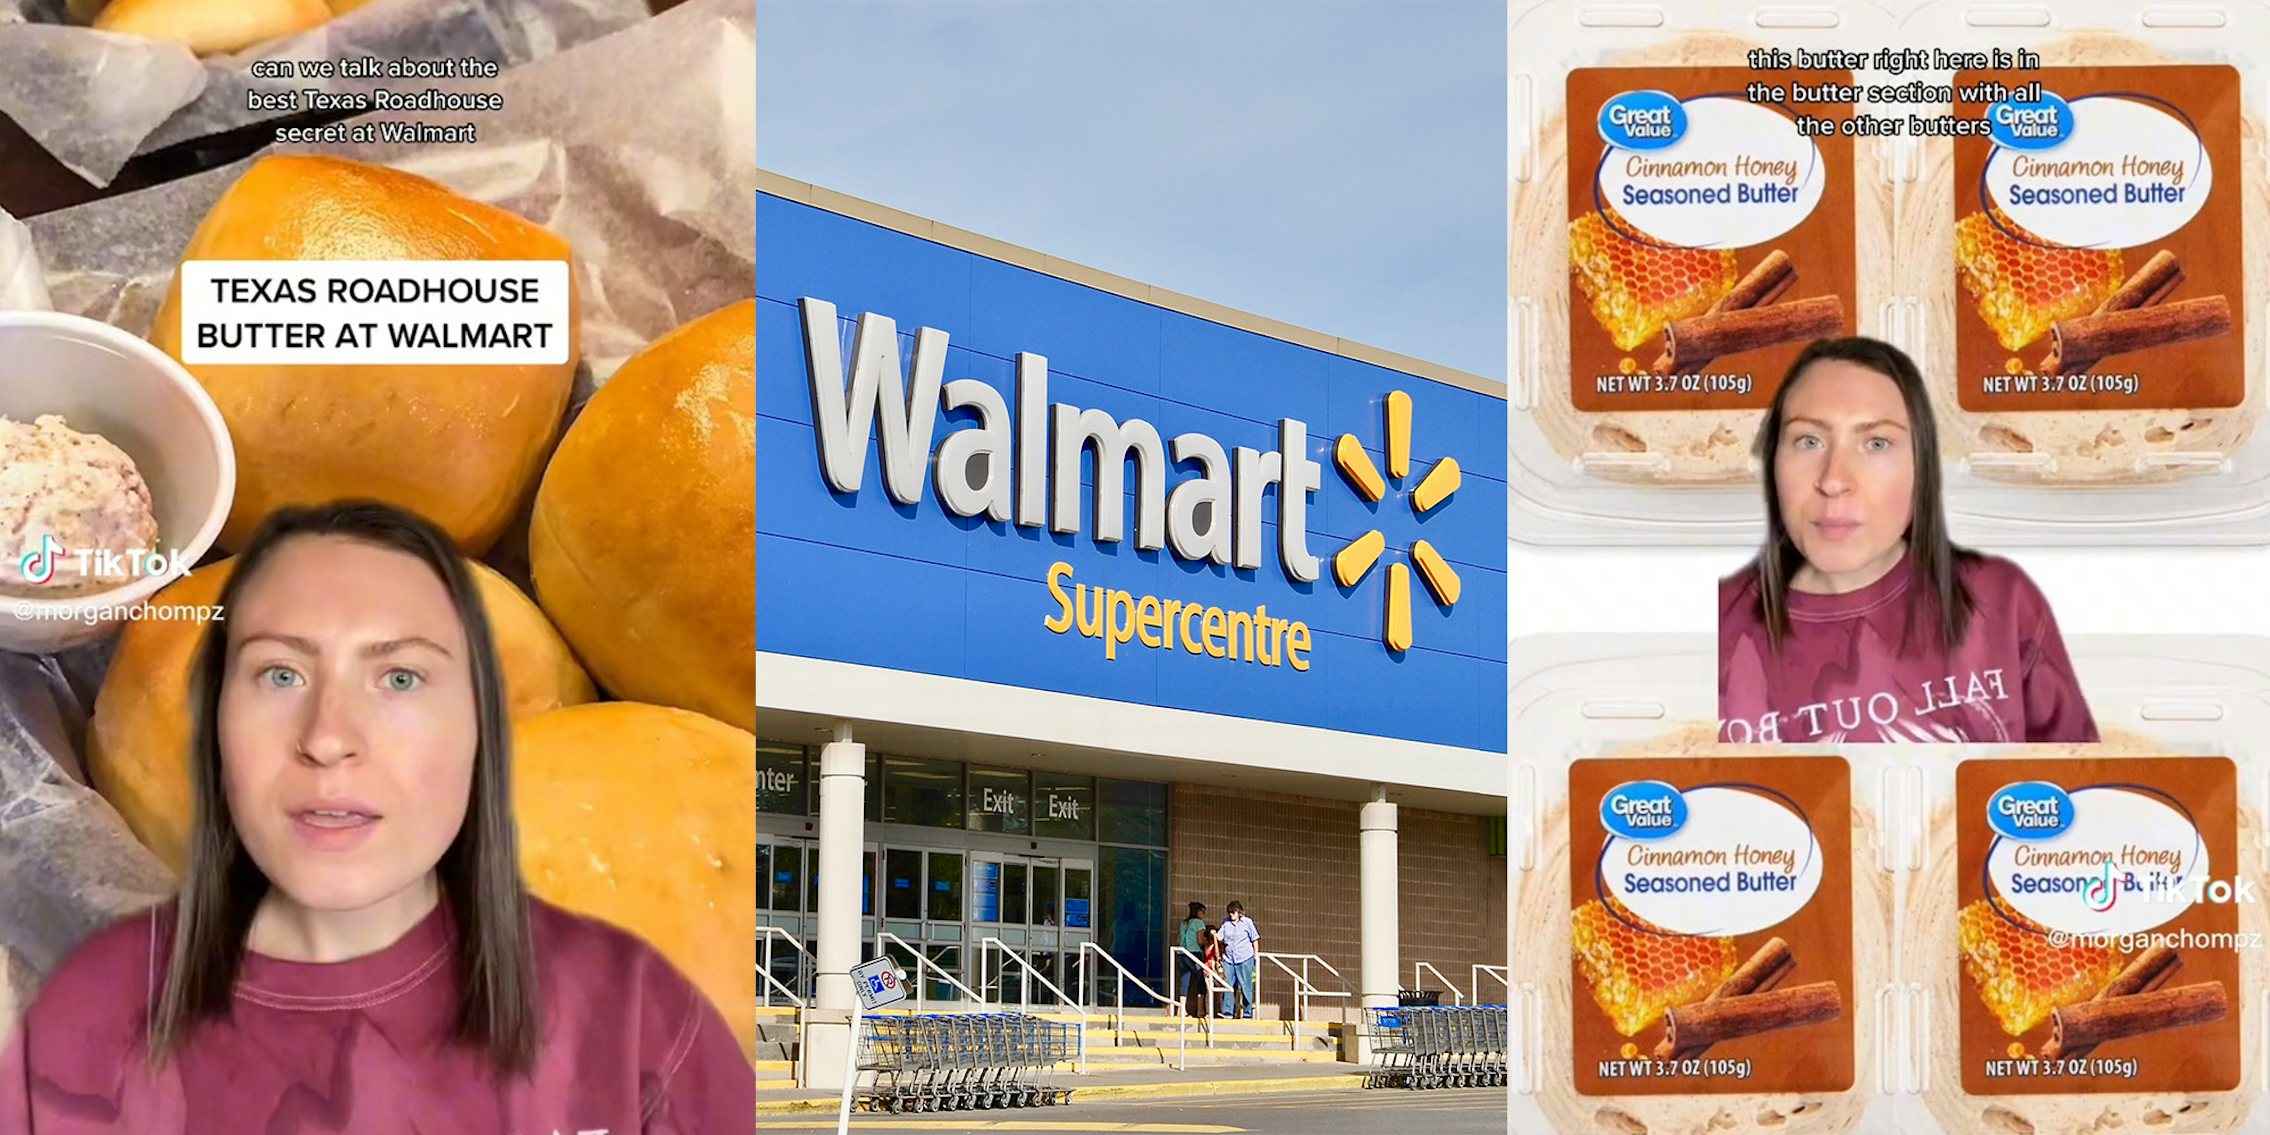 Customer shares Great Value butter at Walmart 'that tastes identical' to the one at Texas Roadhouse